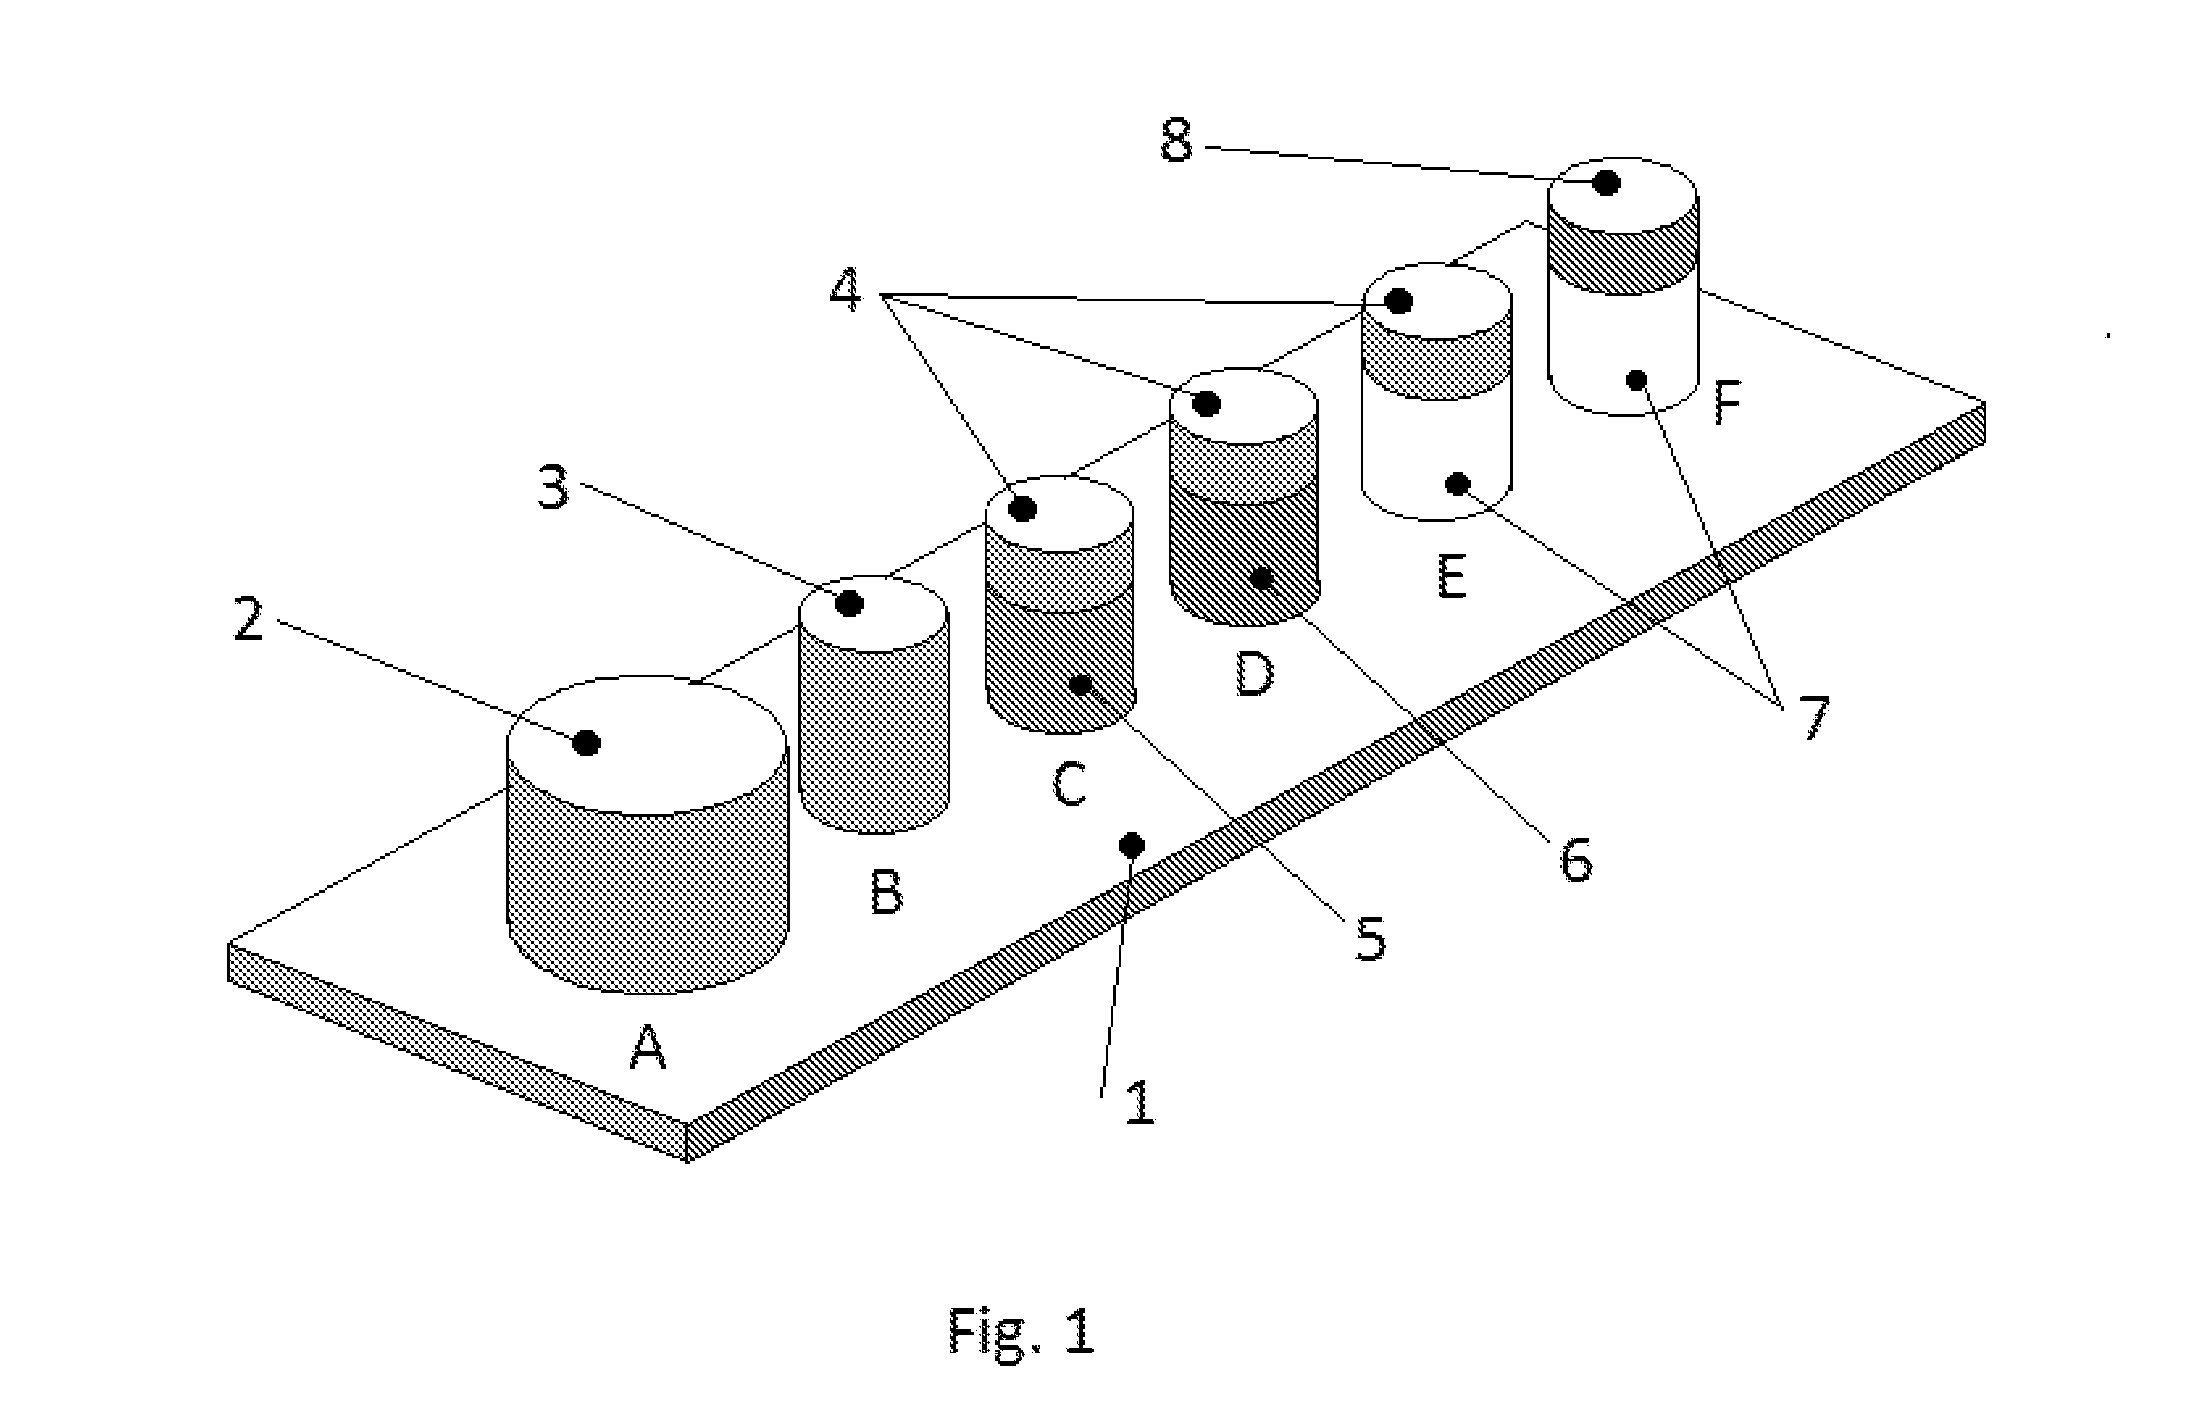 Apparatus for imitating thermal conductivity and electrical resistance of diamonds and their substitutes